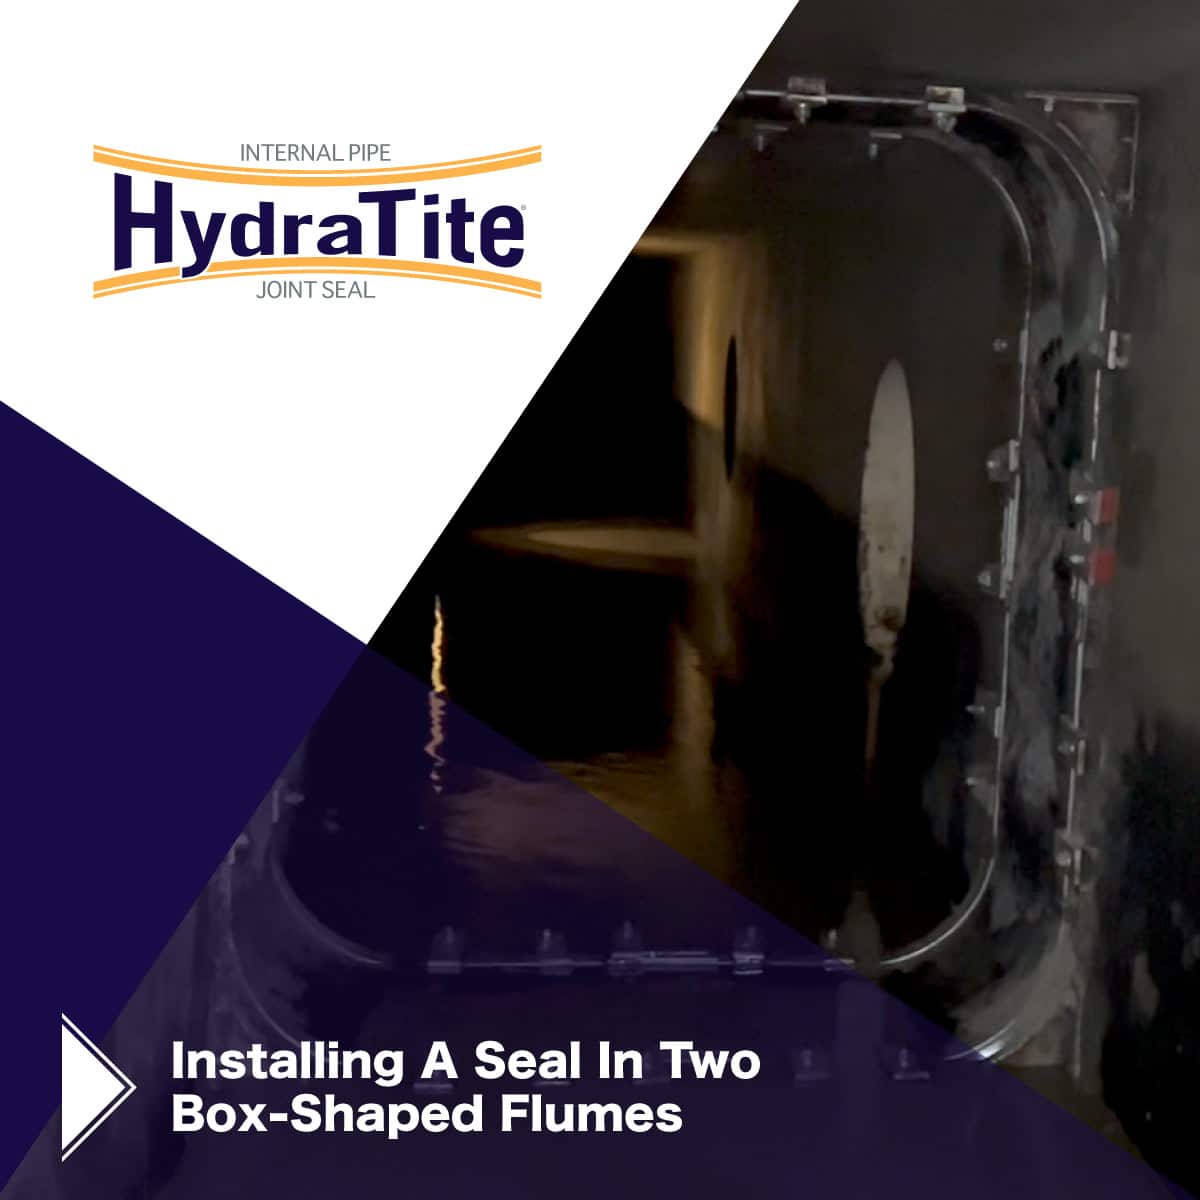 Two joints that have been repaired with HydraTite in a pipe bend, 'Working With Limited Time'